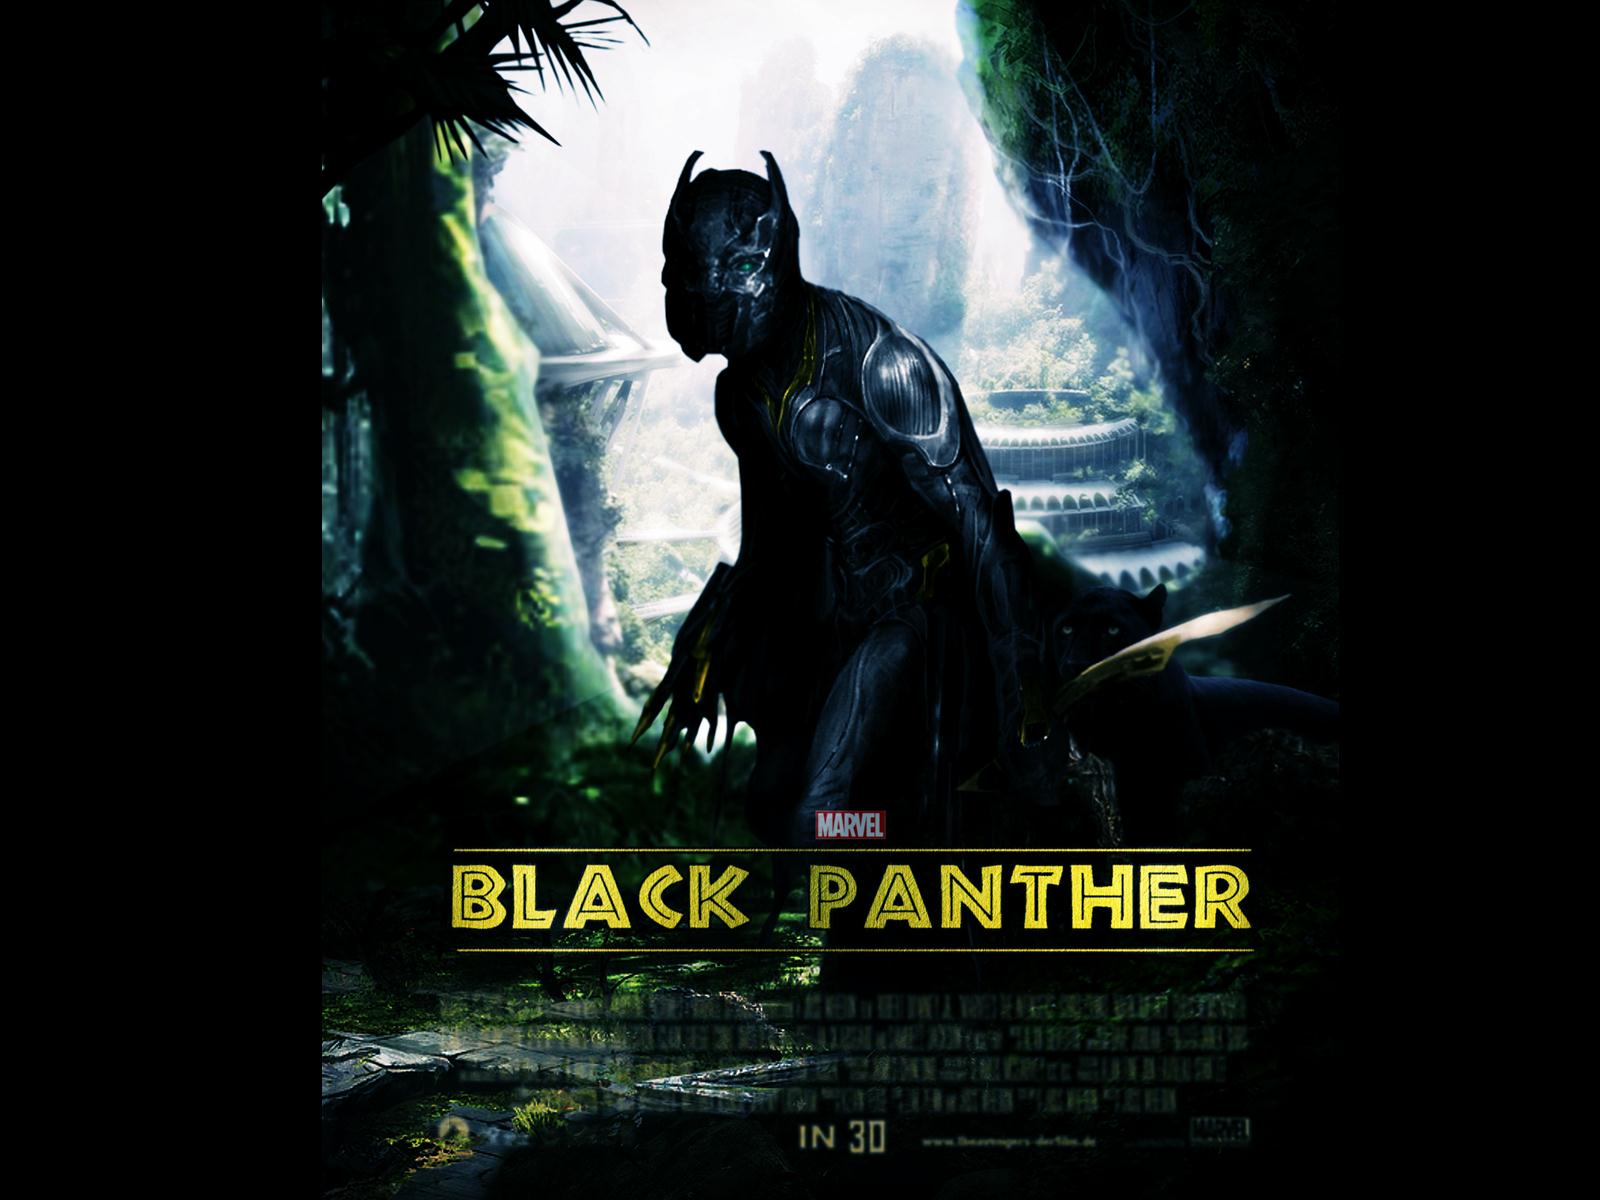 Marvel Black Panther Movie Poster HD Wallpaper Search more high